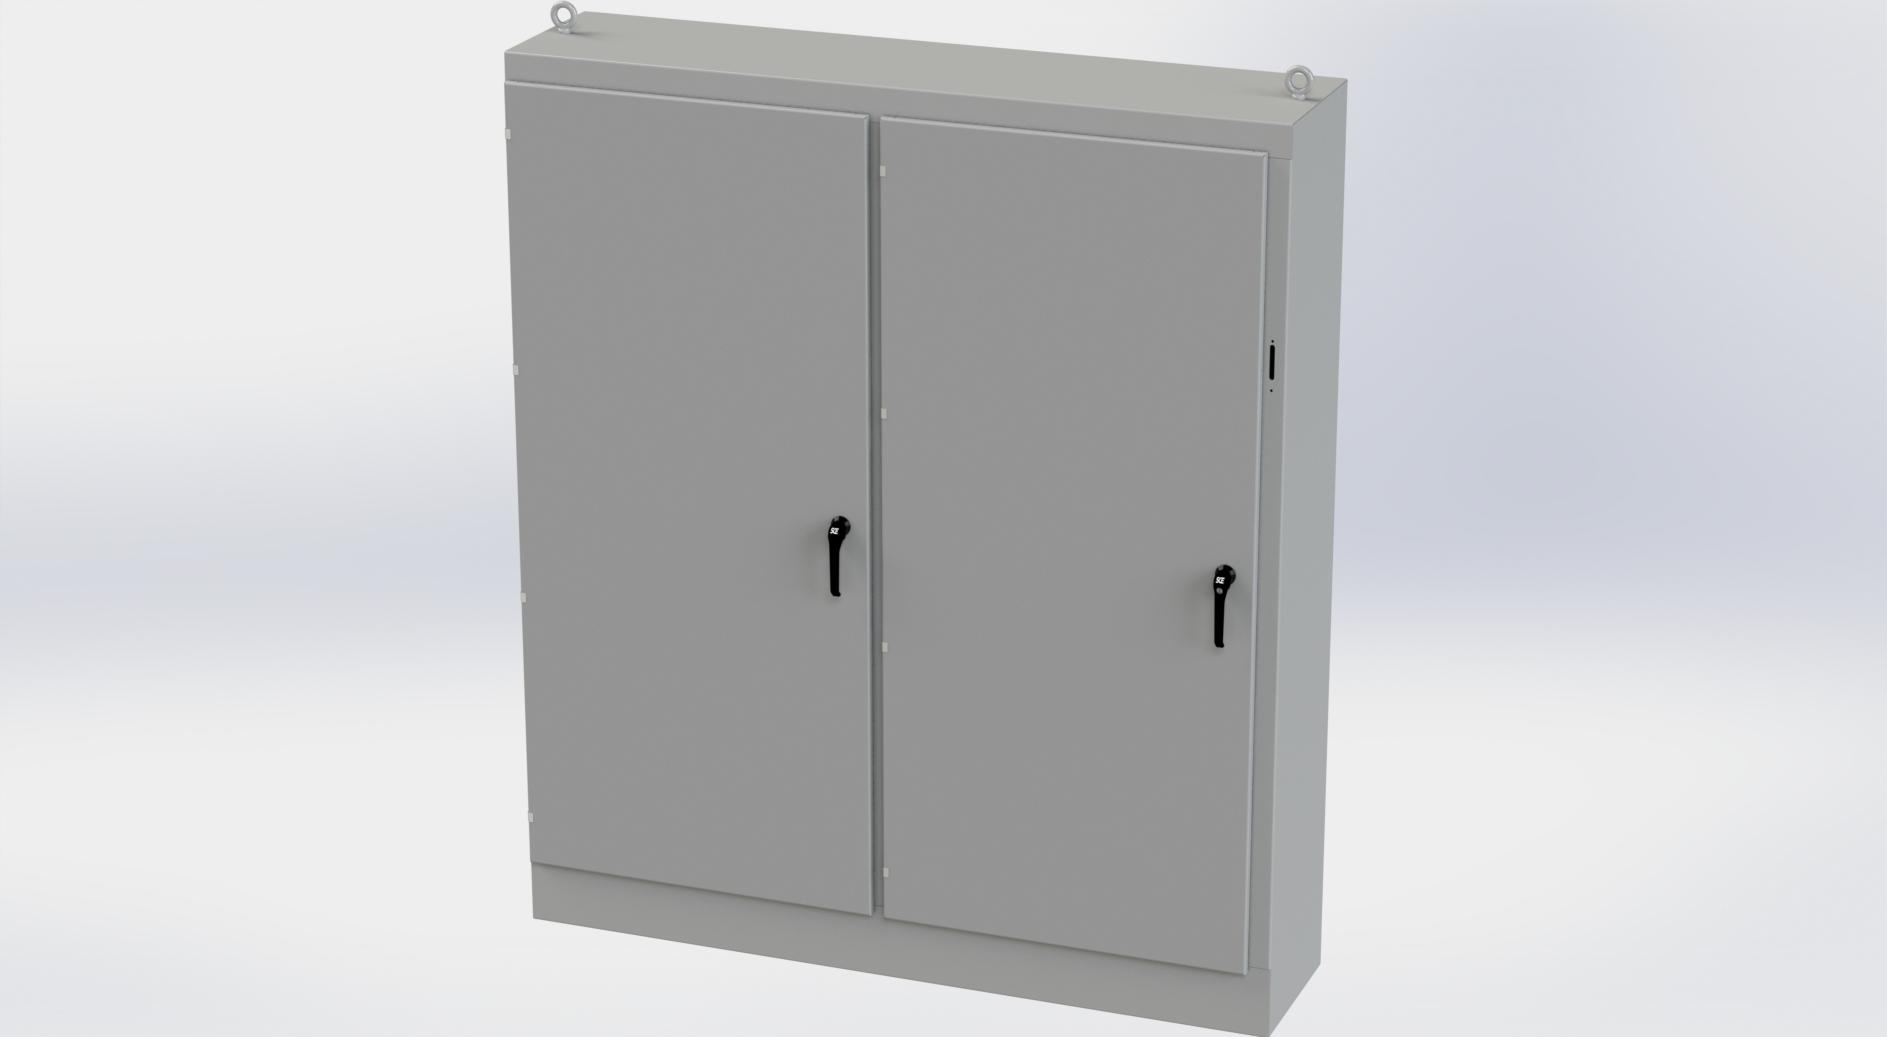 Saginaw Control SCE-90XM7818G 2DR XM Enclosure, Height:90.00", Width:77.75", Depth:18.00", ANSI-61 gray powder coating inside and out. Sub-panels are powder coated white.